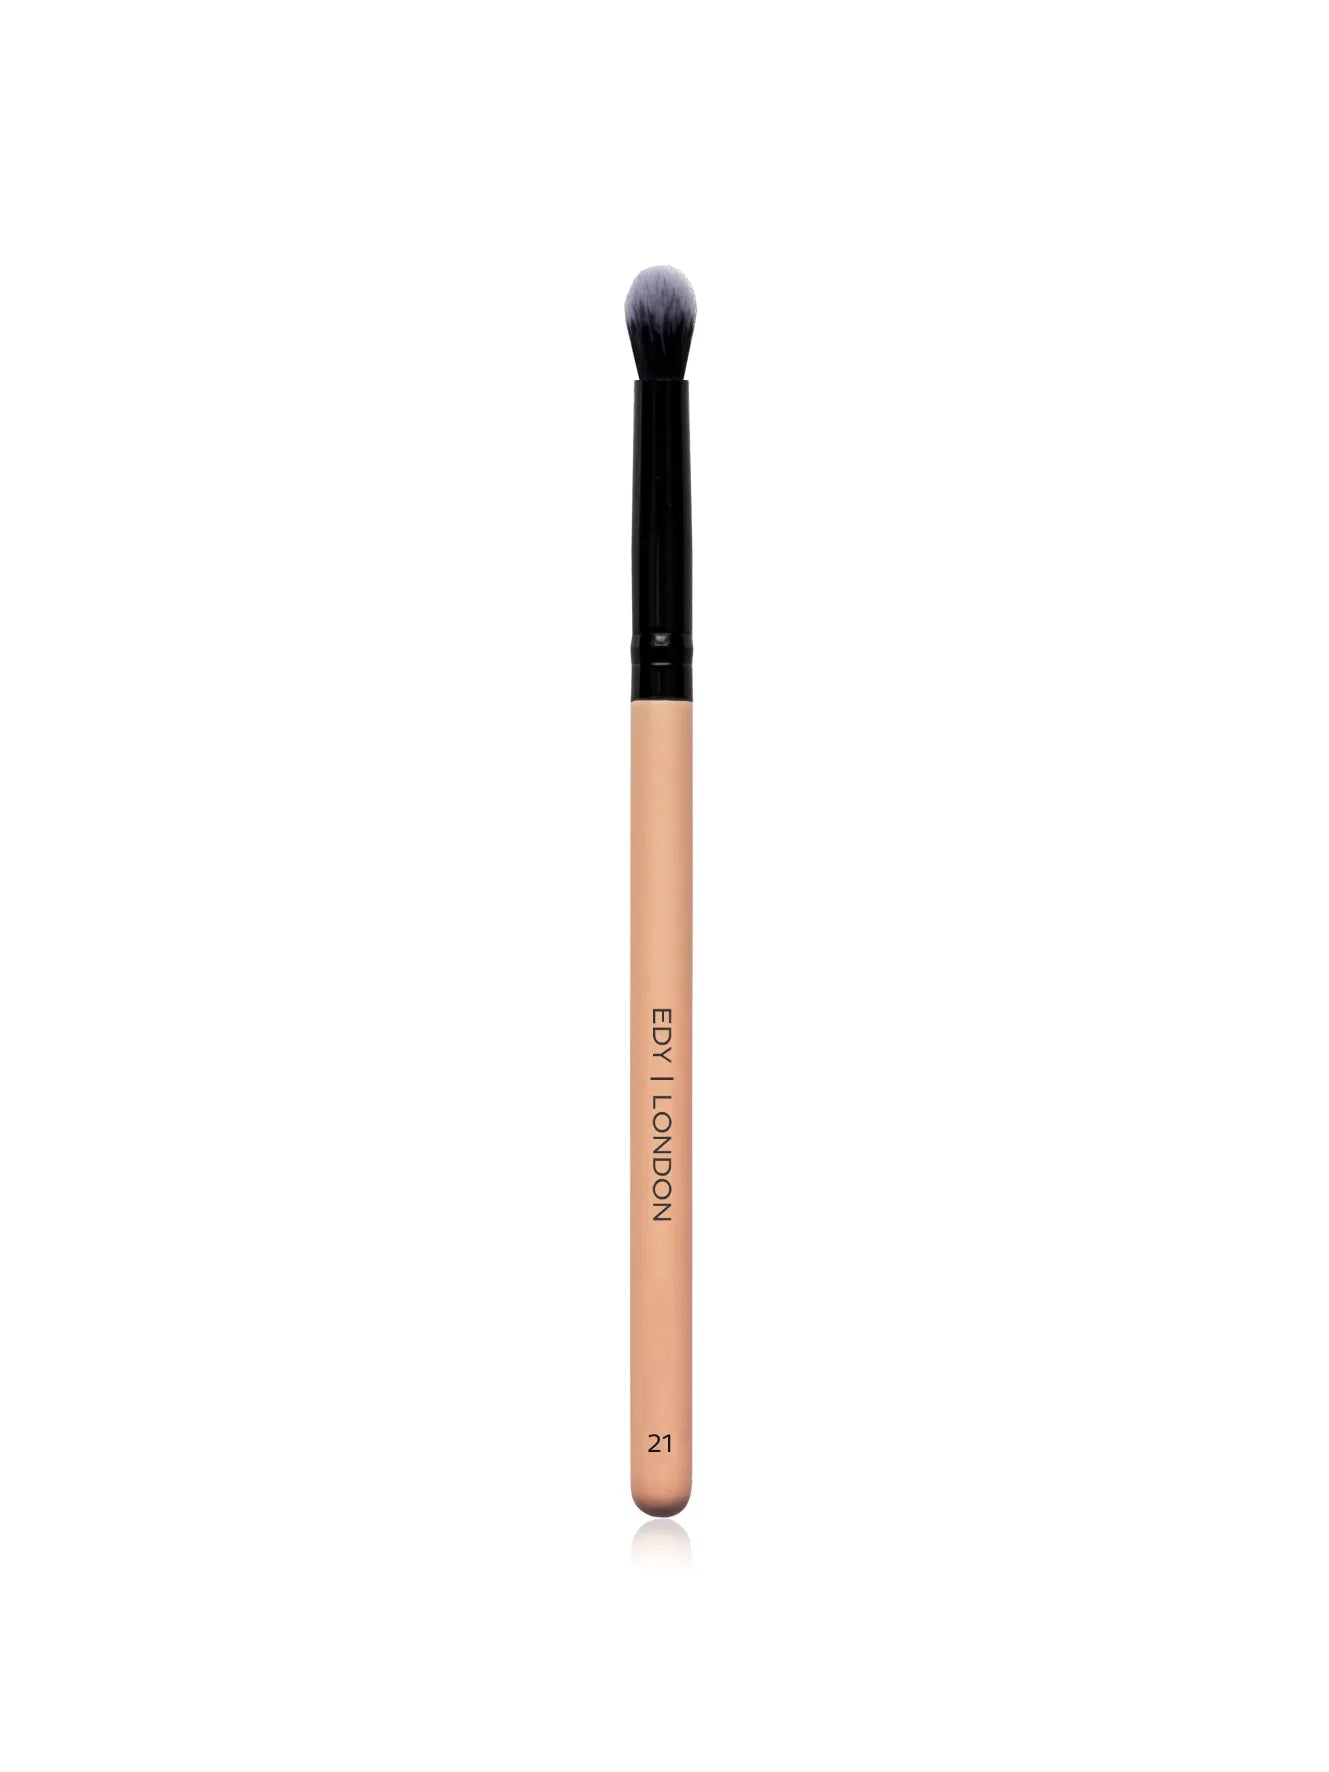 Tapered Blender Brush 21 Make-up Brush EDY LONDON Pale Pink   - EDY LONDON PRODUCTS UK - The Best Makeup Brushes - shop.edy.london